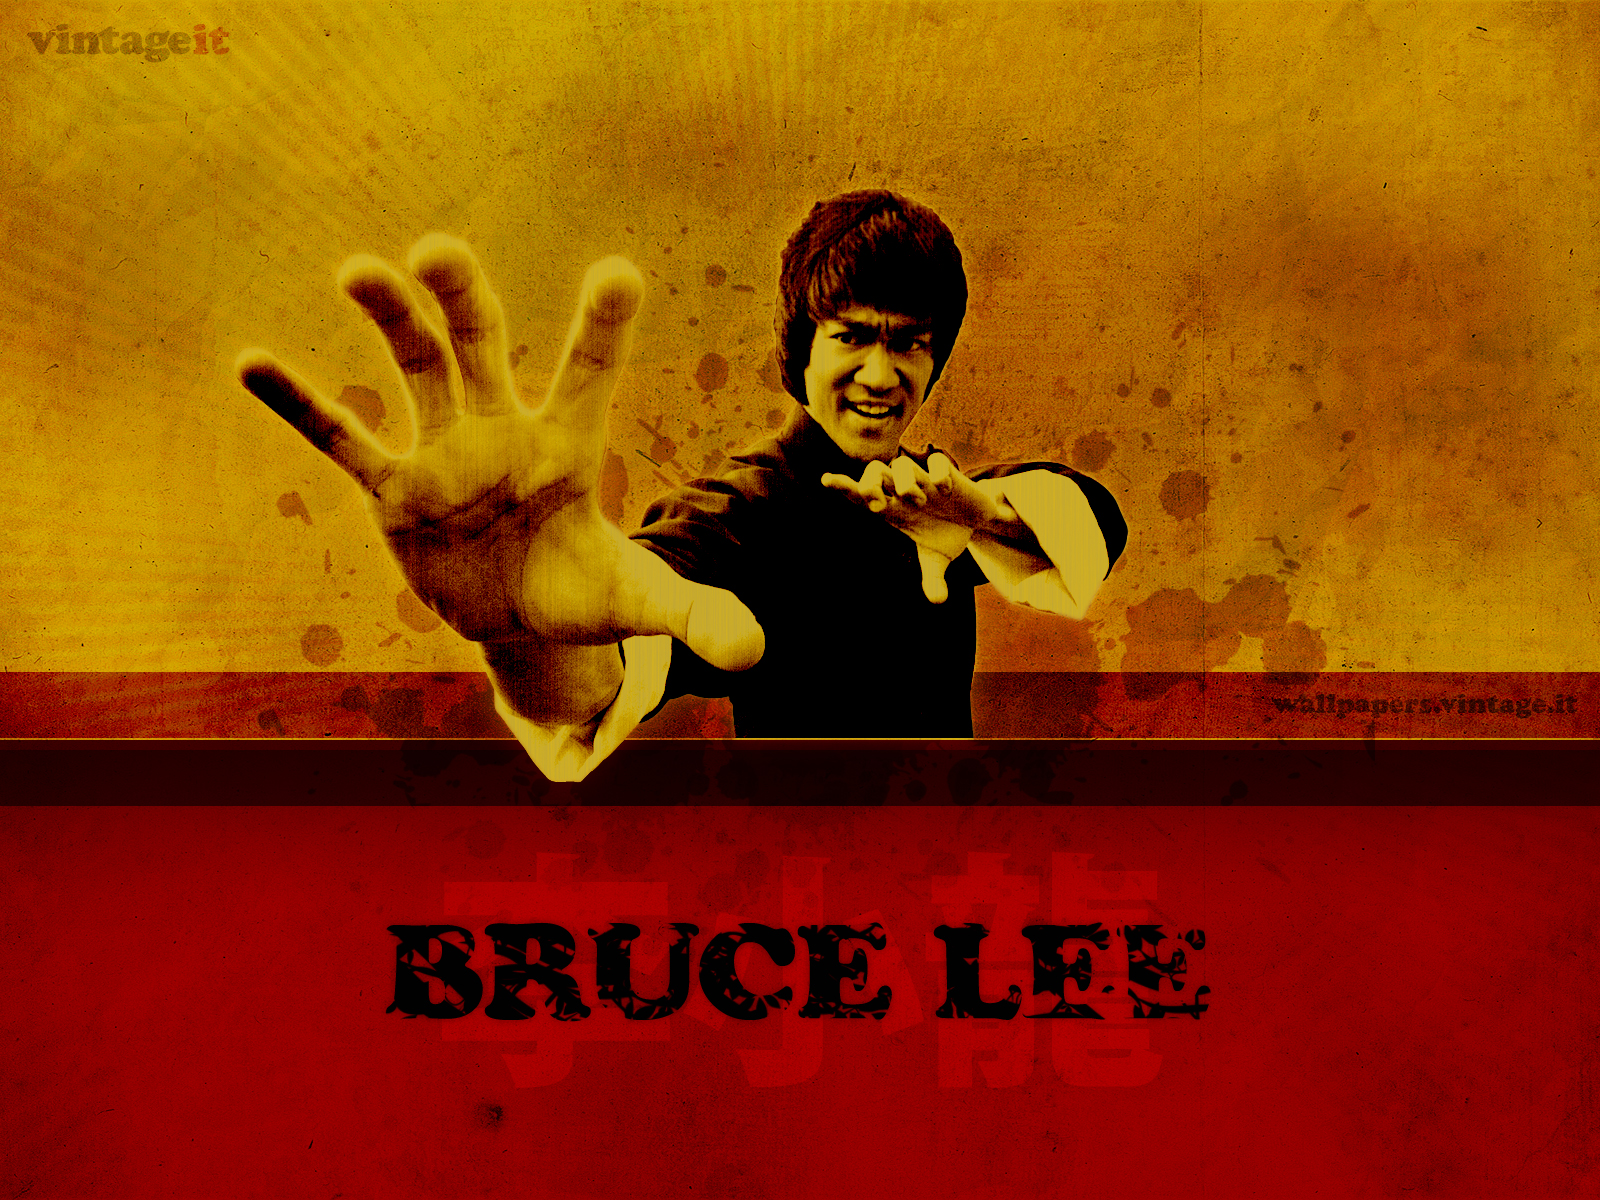 bruce lee hd wallpaper,red,yellow,wall,font,graphics